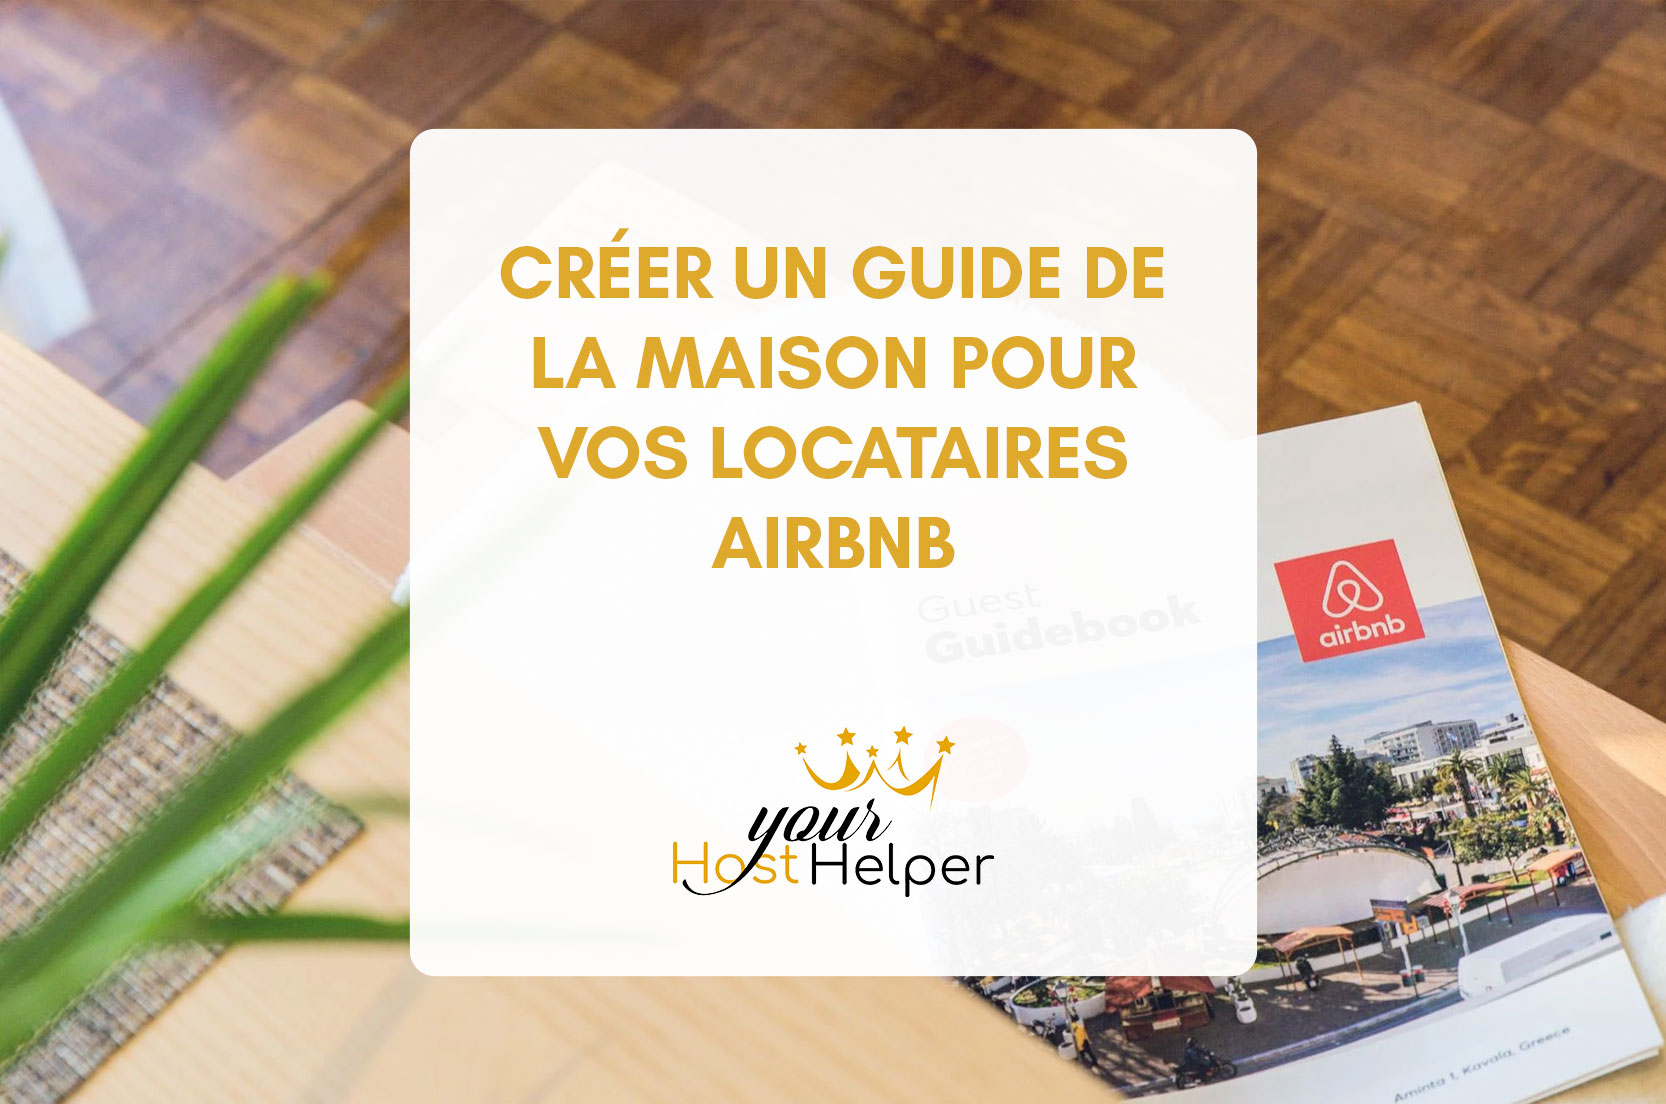 You are currently viewing Create a home guide for your Airbnb tenants